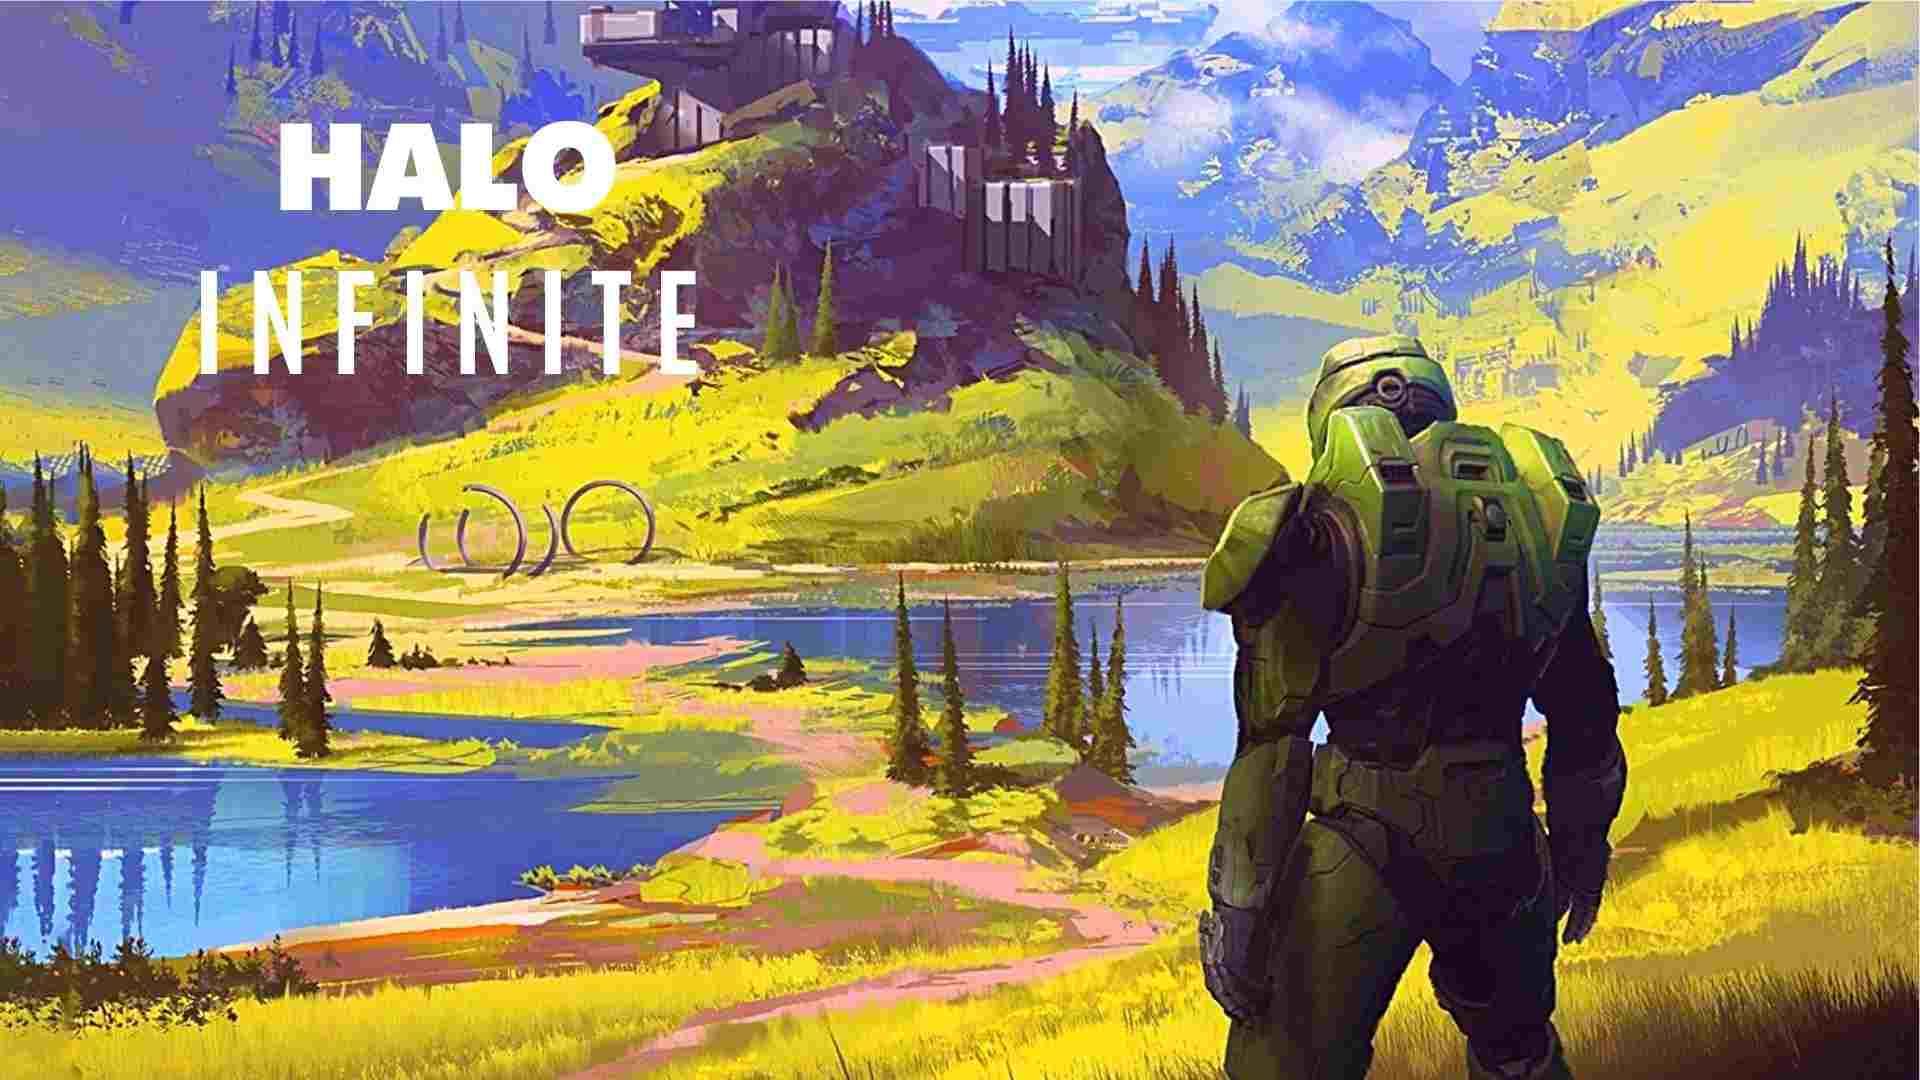 Halo Infinite Parents Guide and Age Rating